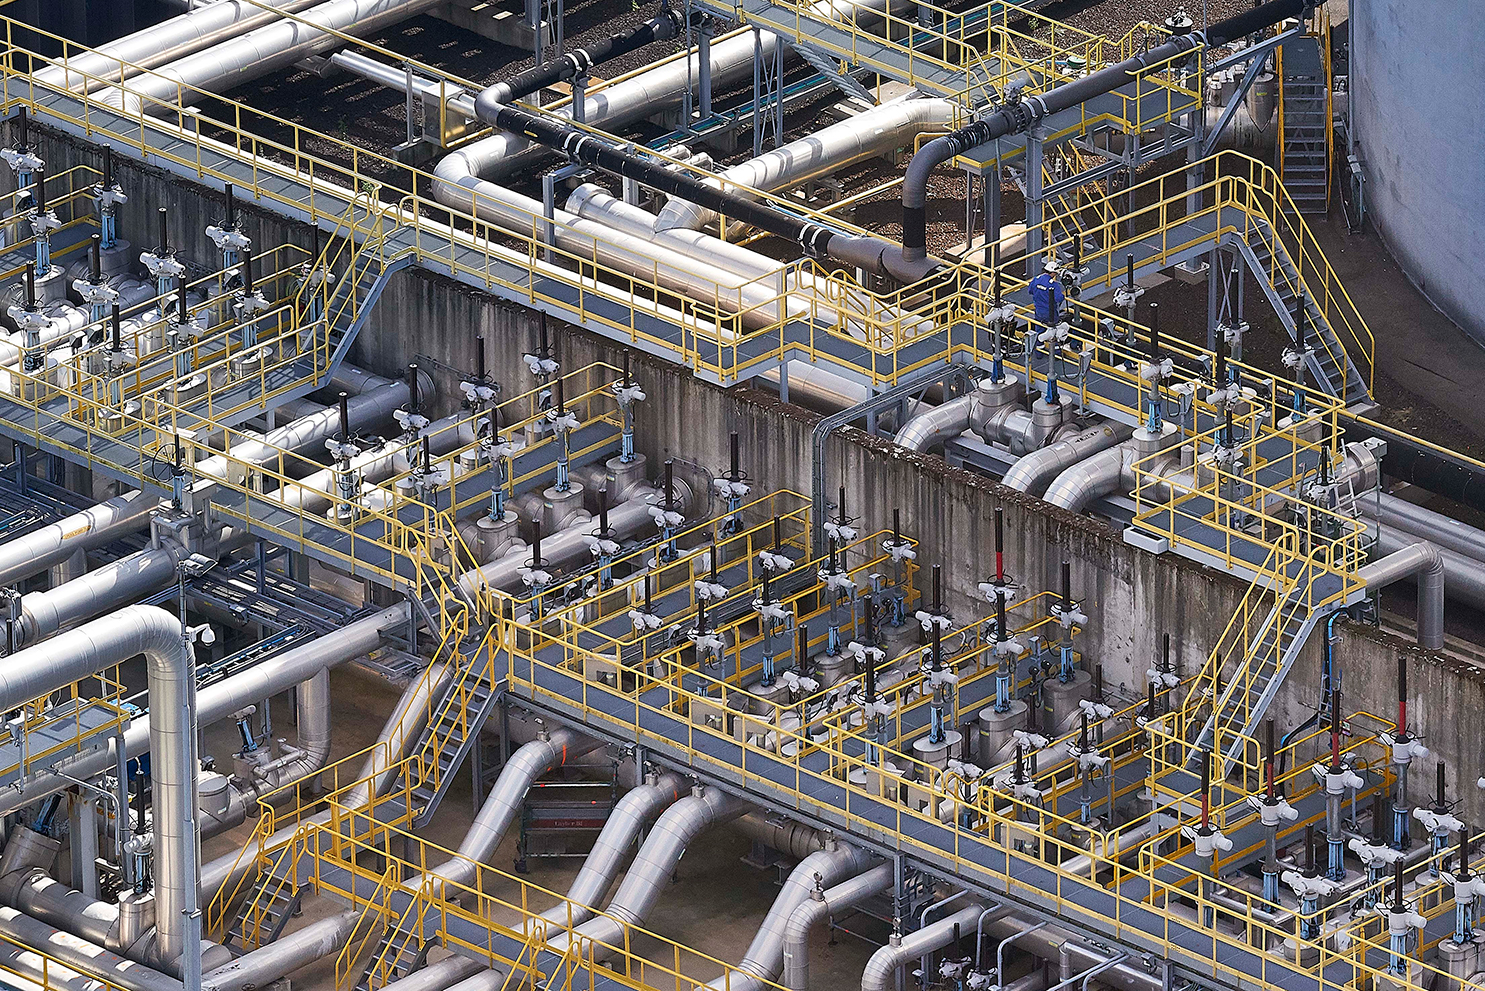 Intelligent Asset Management is designed to improve reliability and availability of key assets (such as valves) in industries that use flow control processes.